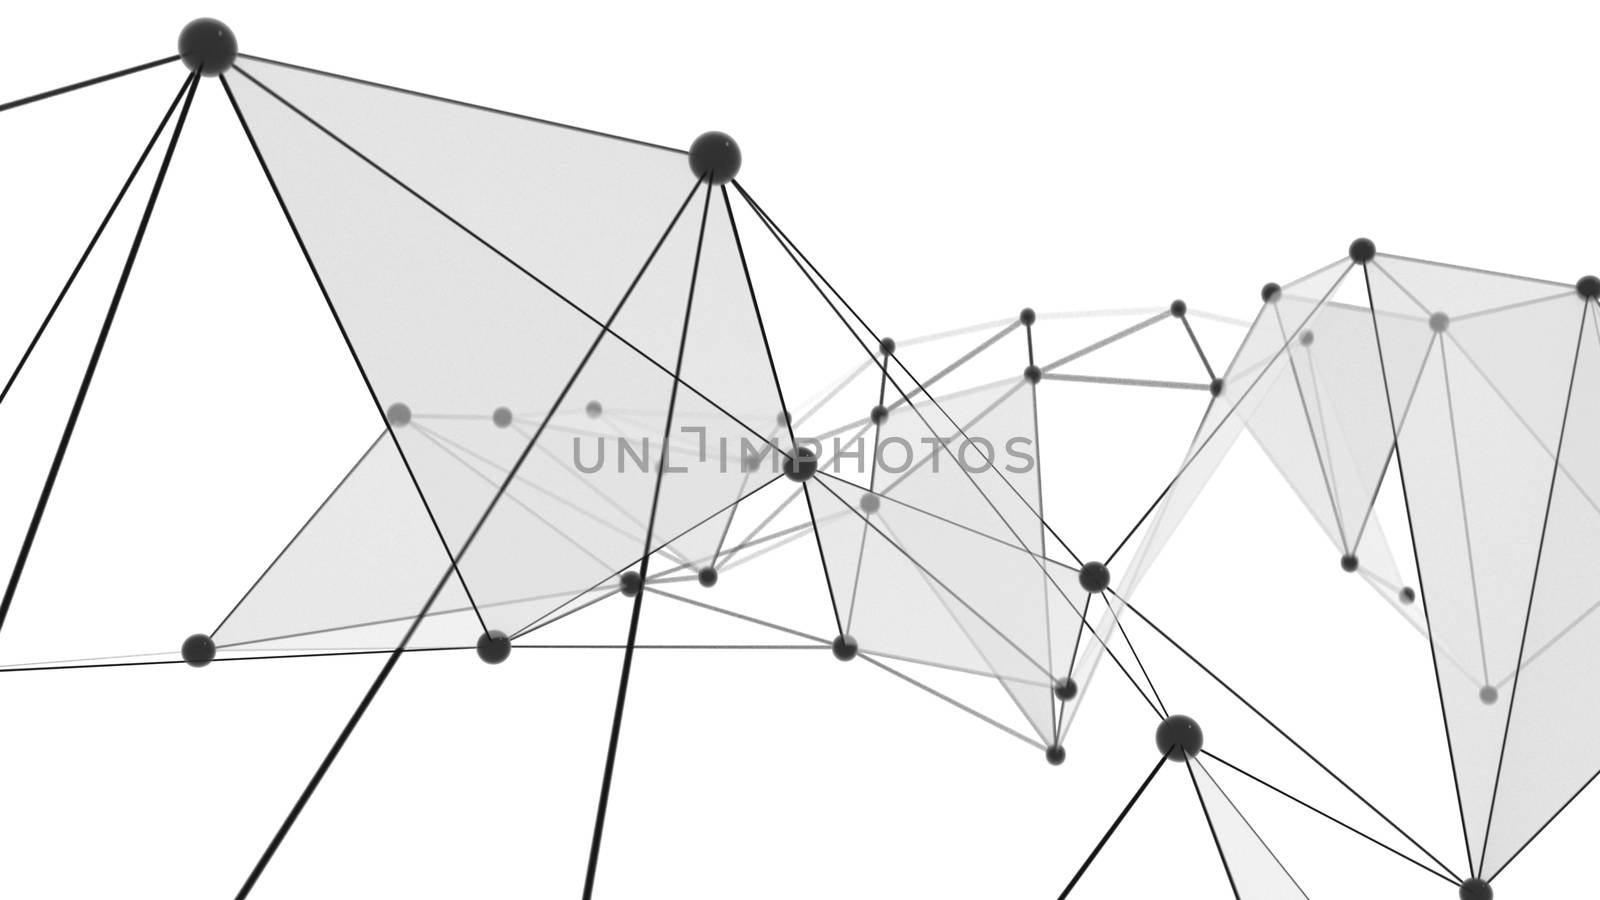 Concept of Network, Internet Communication. The black points are connected by lines and blue transparent triangles. 3D Illustration